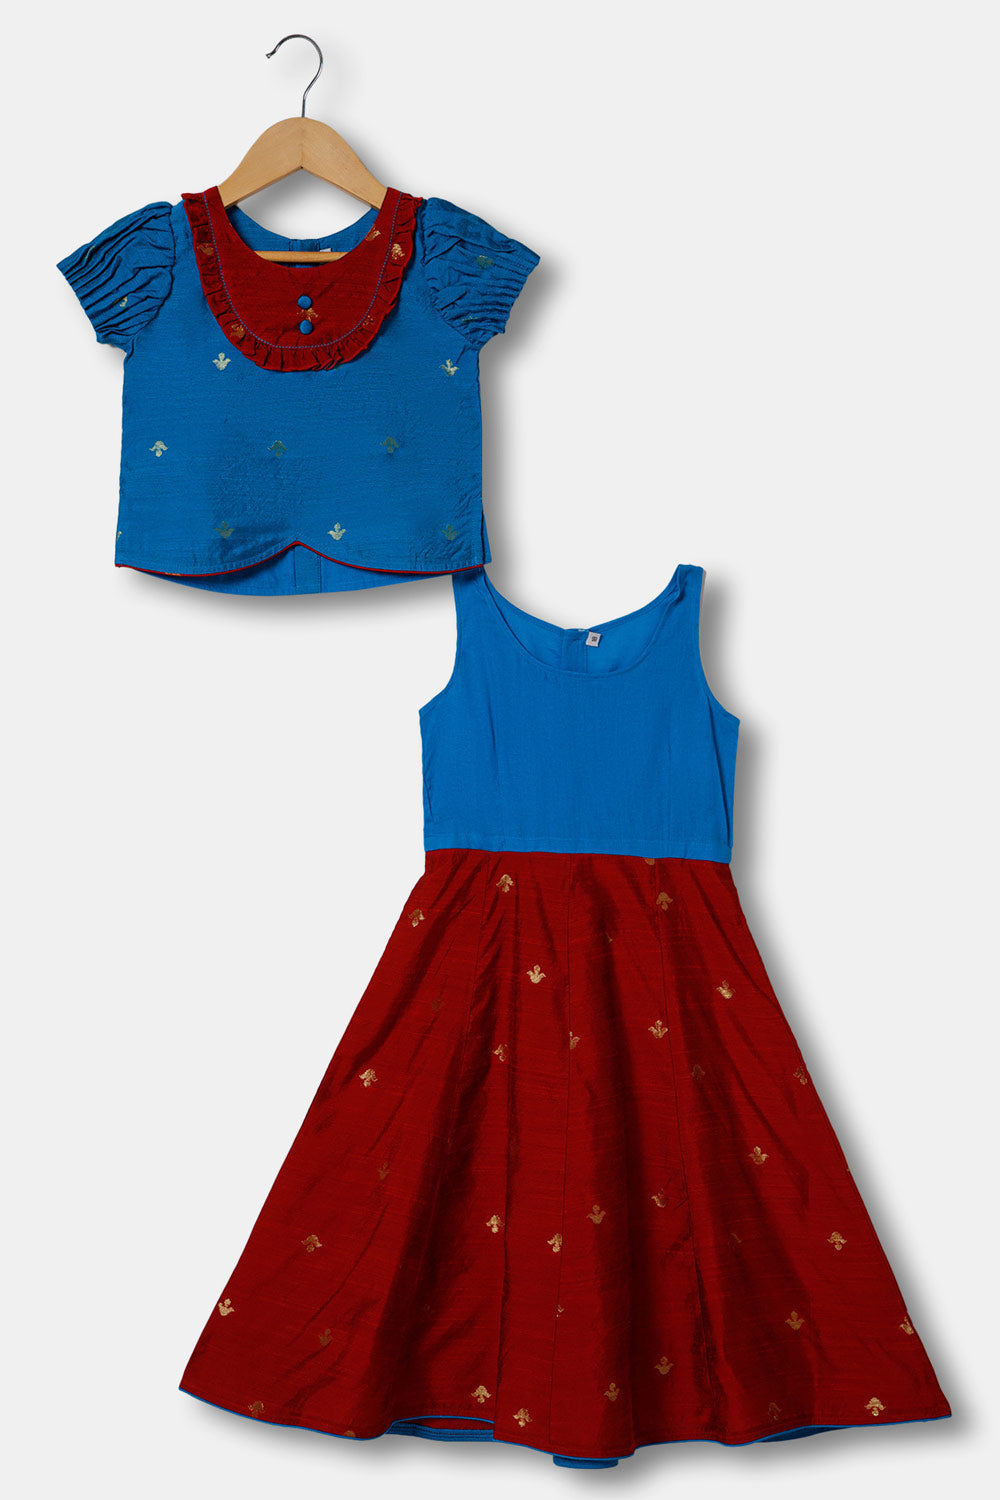 Chittythalli Pintuck Sleeve With Patch Work With Ruffle Detailing Top And Skirt Pavadai Set -  Blue  - PS33